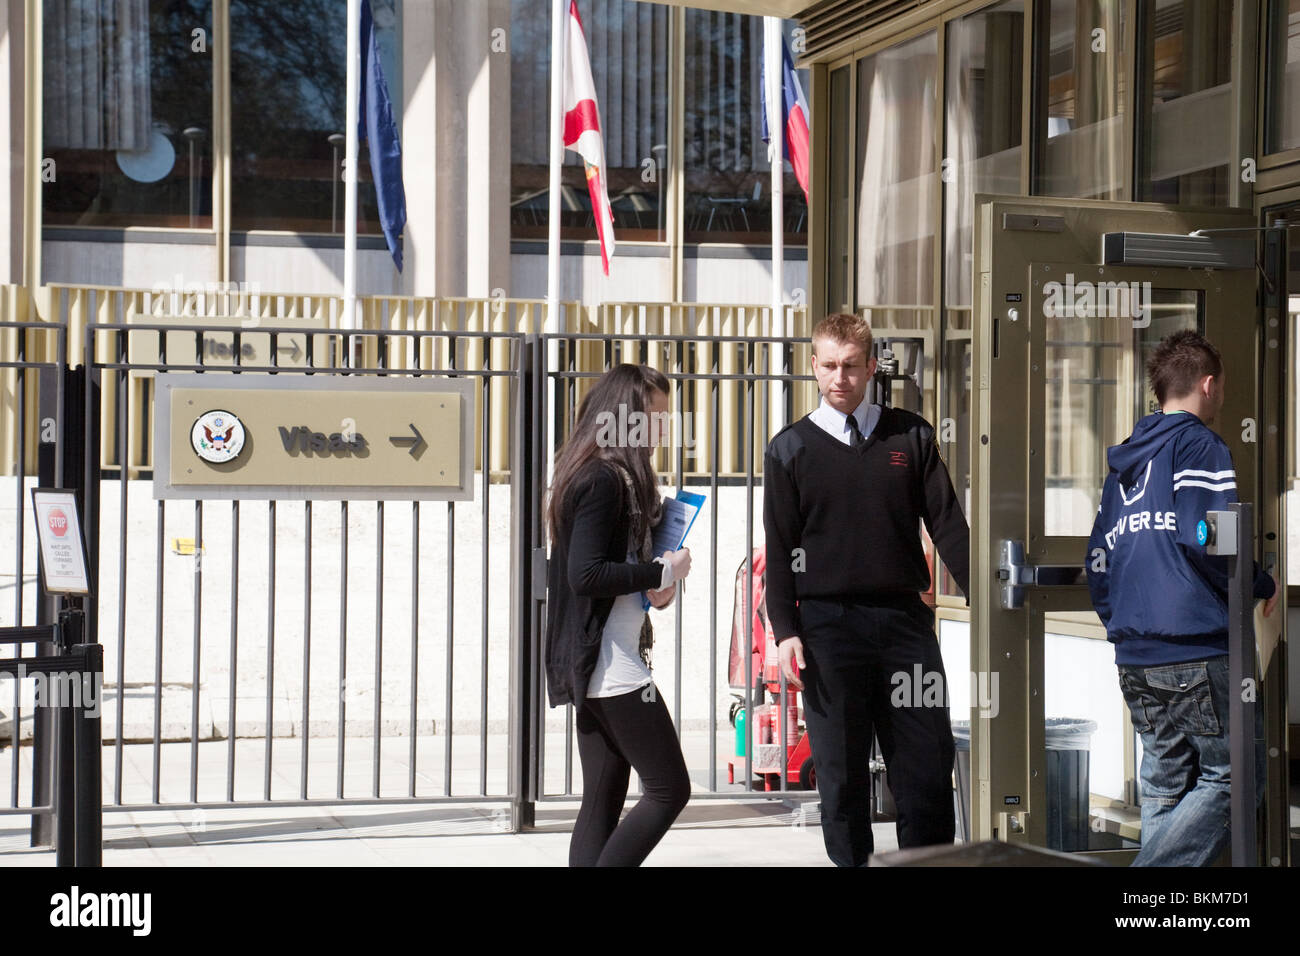 Security for british teenagers applying for visas, The US Embassy, Grosvenor Square, London UK Stock Photo